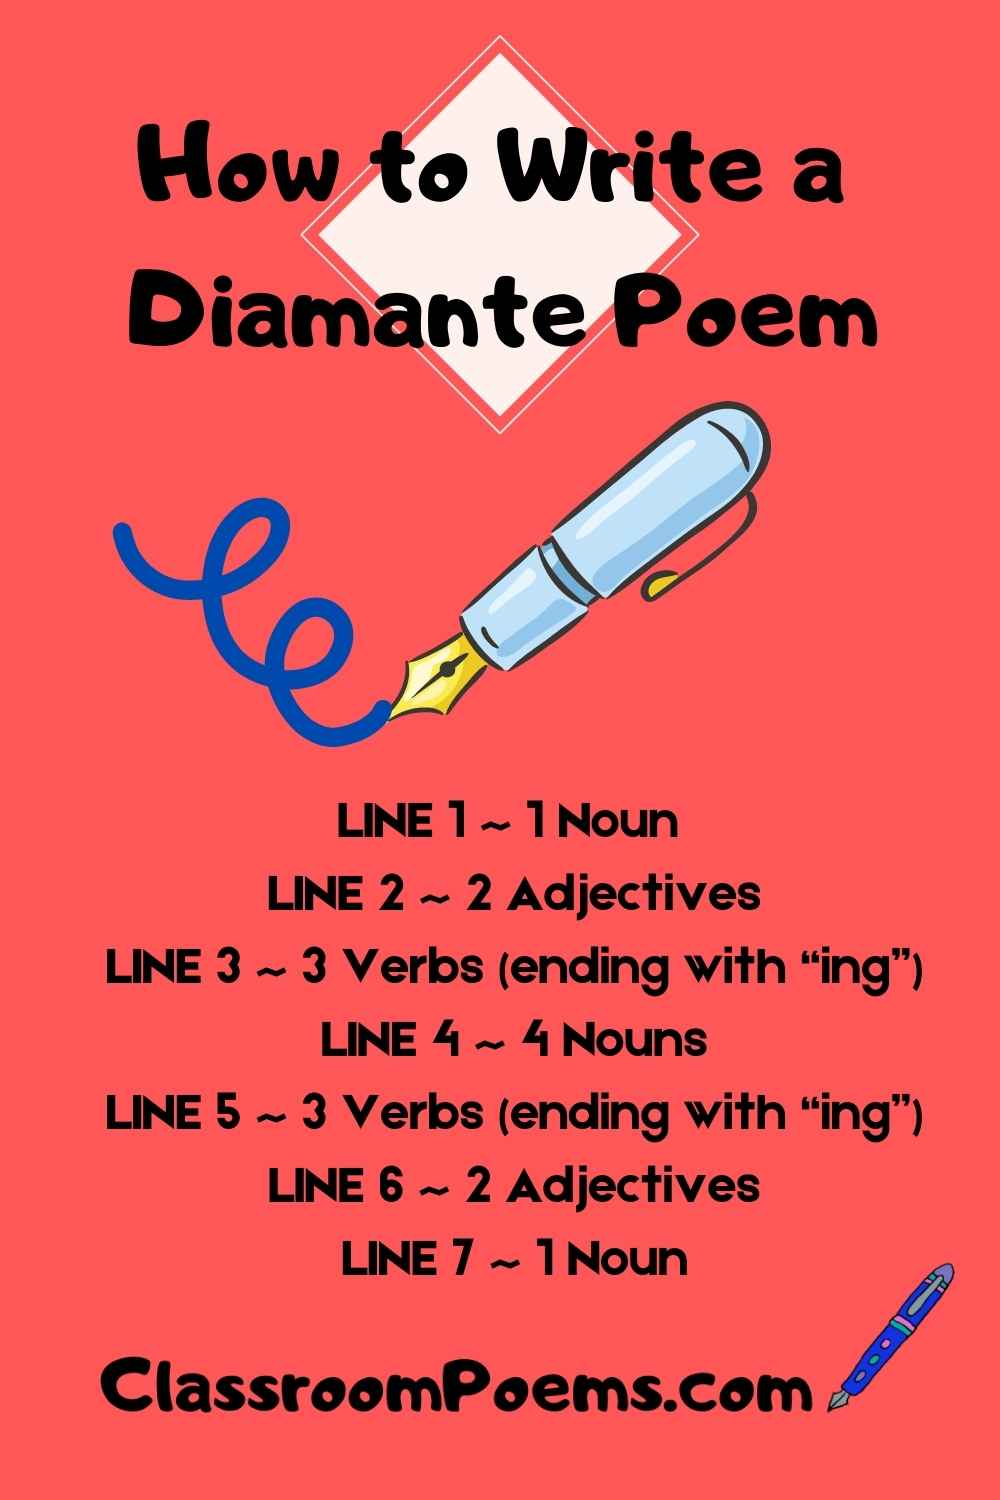 Learn how to write a diamante poem. It's simple form is a creative challenge for budding poets.